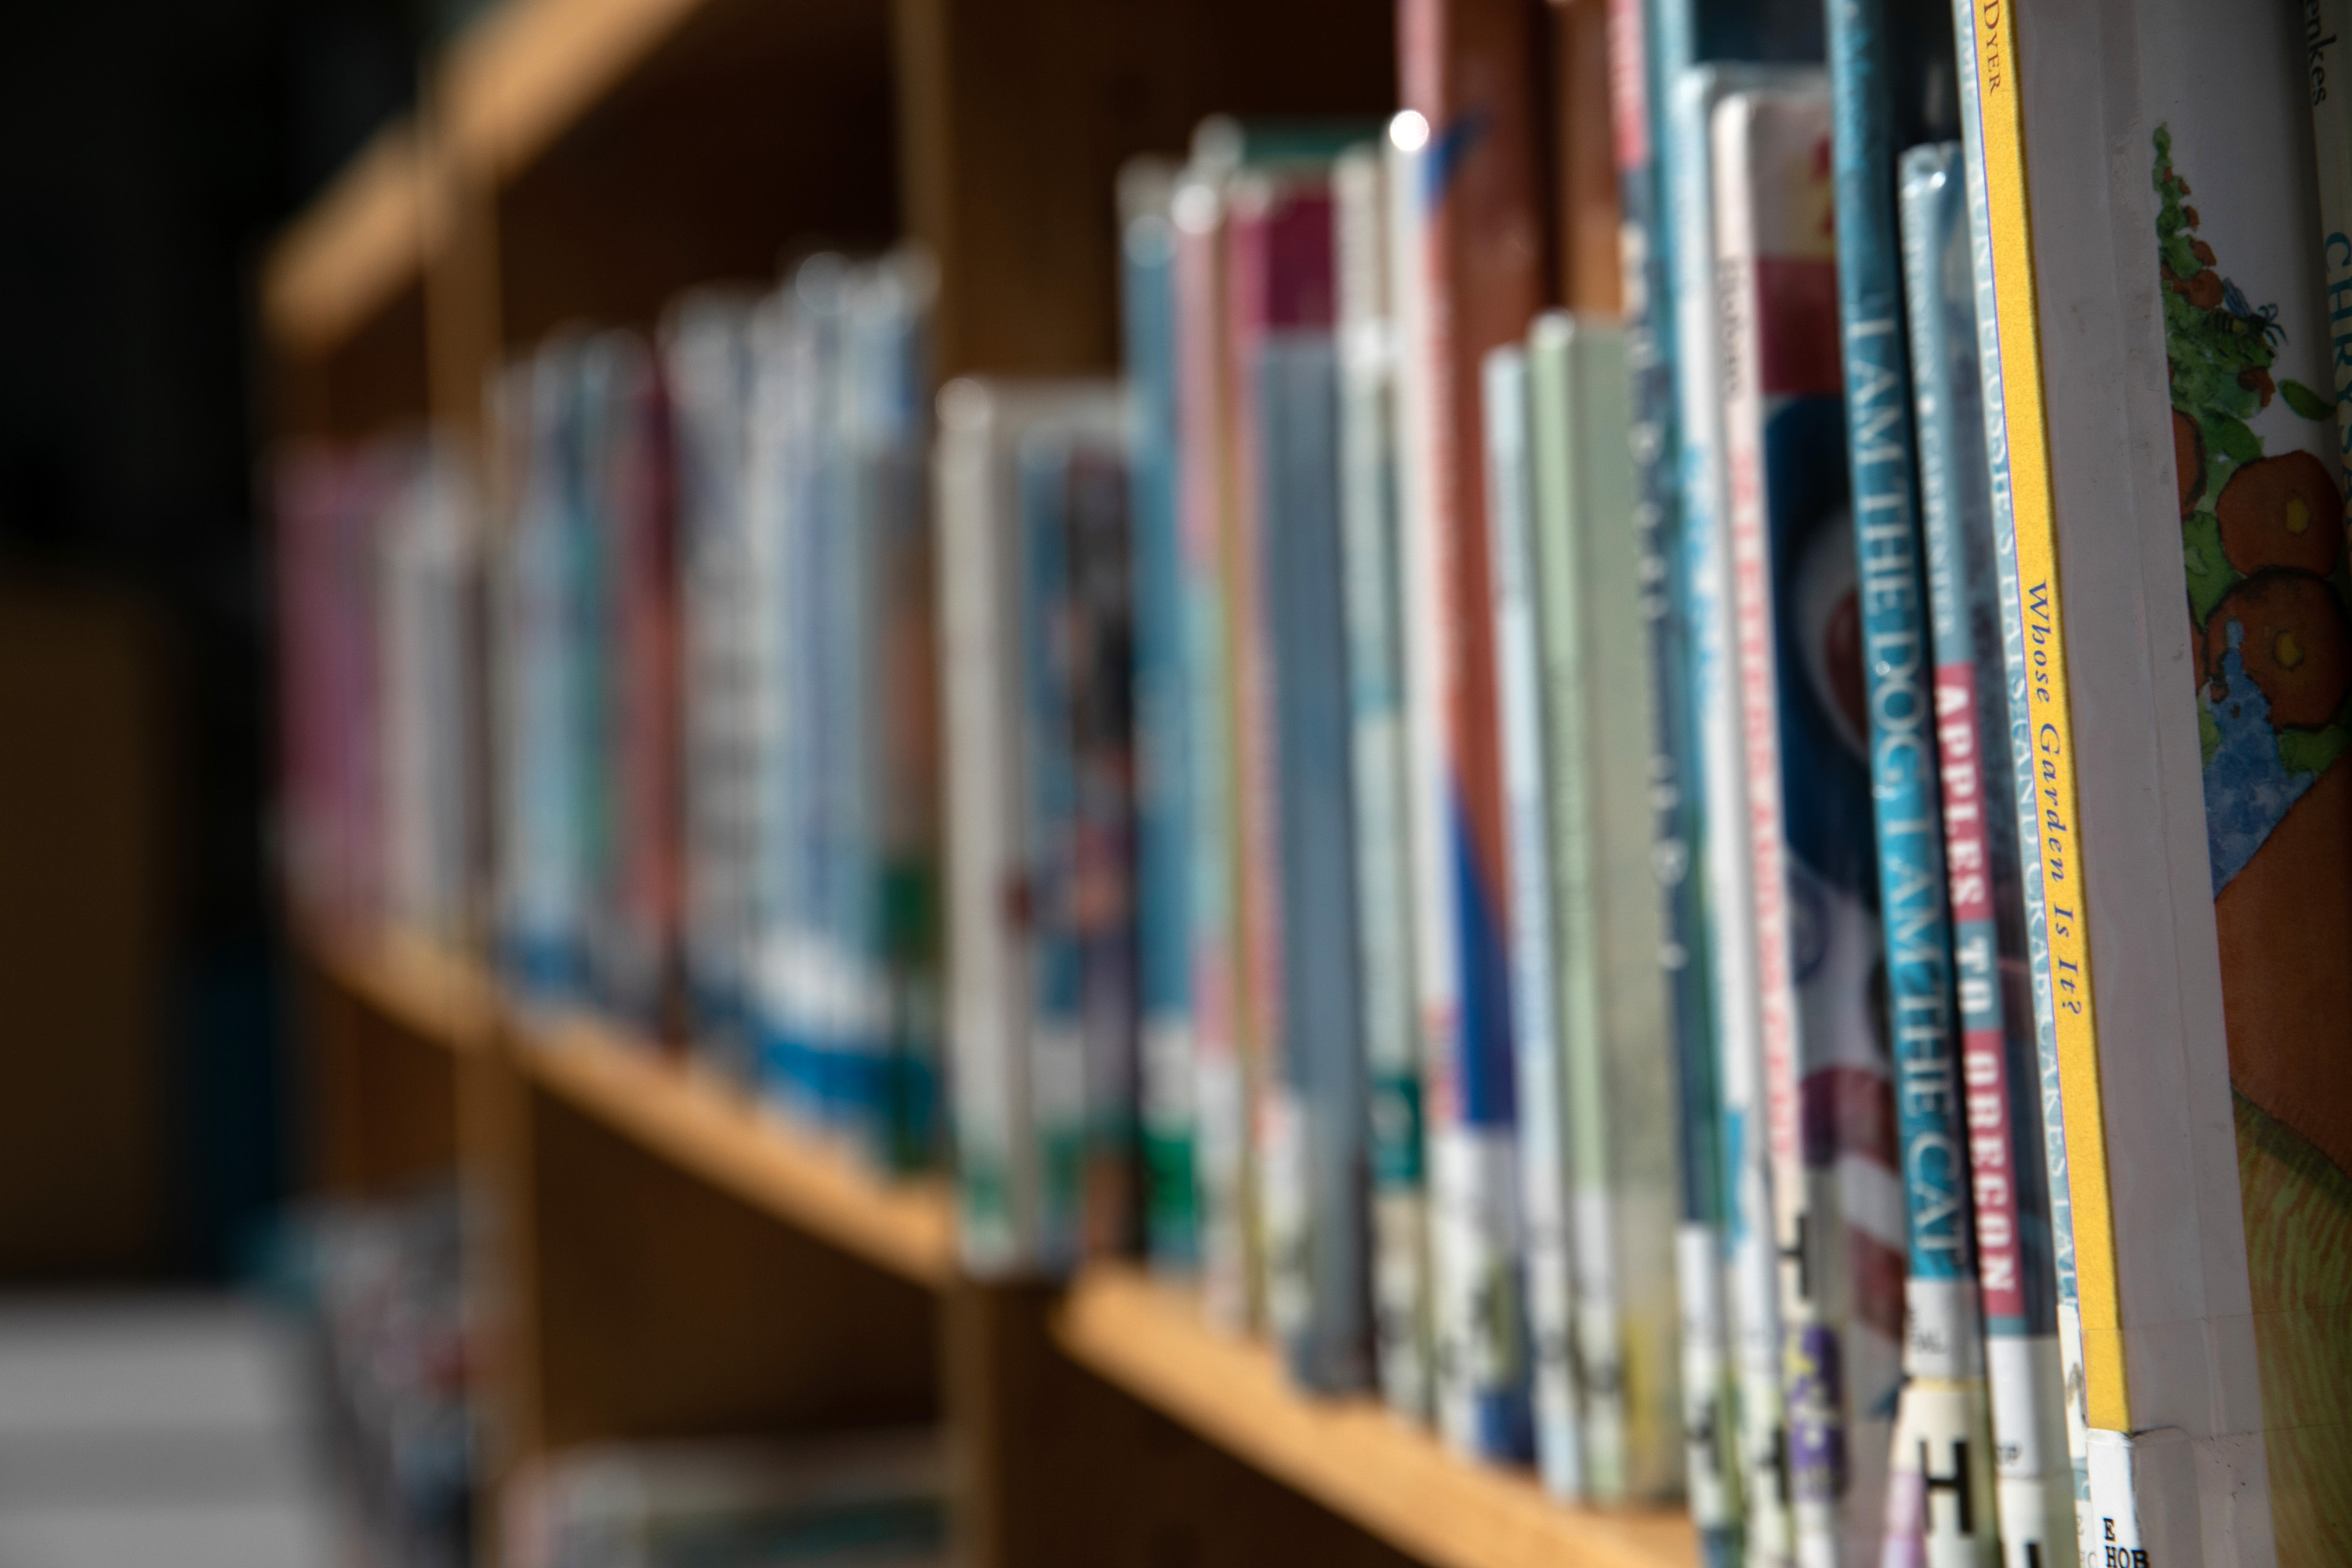 Xxx Hundi School Com - Do These Books Belong in Public School Libraries? You Be The Judge | Opinion